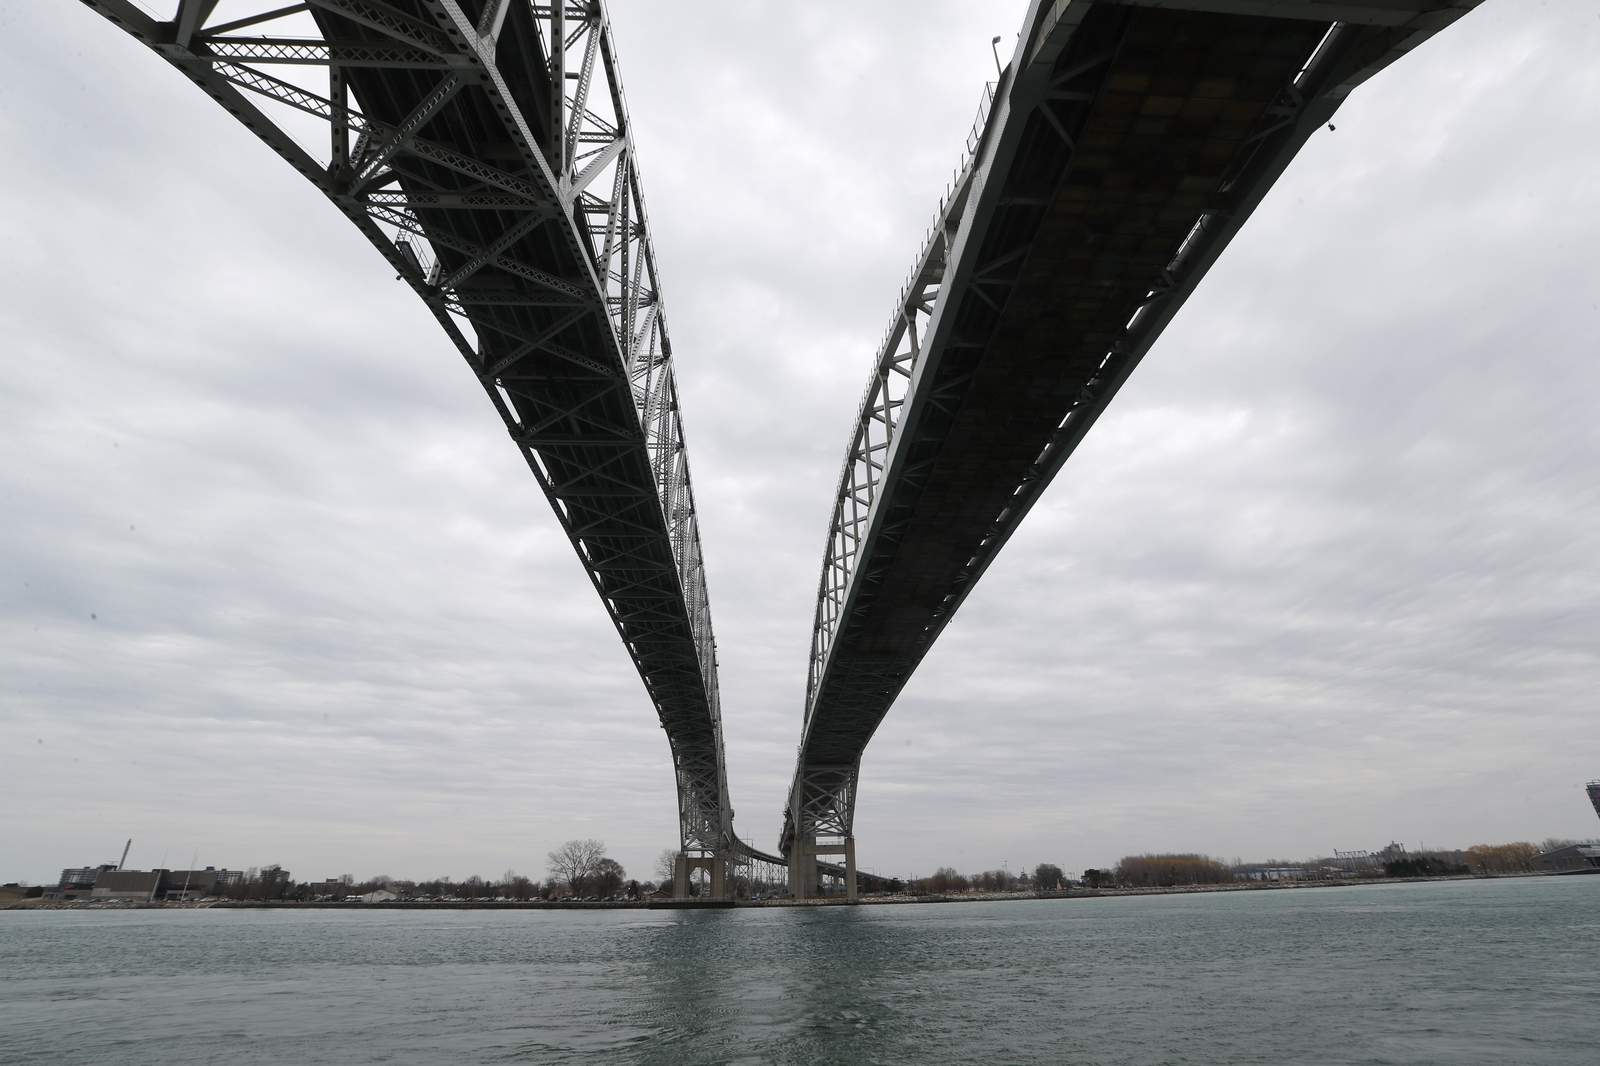 Over 80 pounds of cocaine and fentanyl seized at Blue Water Bridge in Port Huron